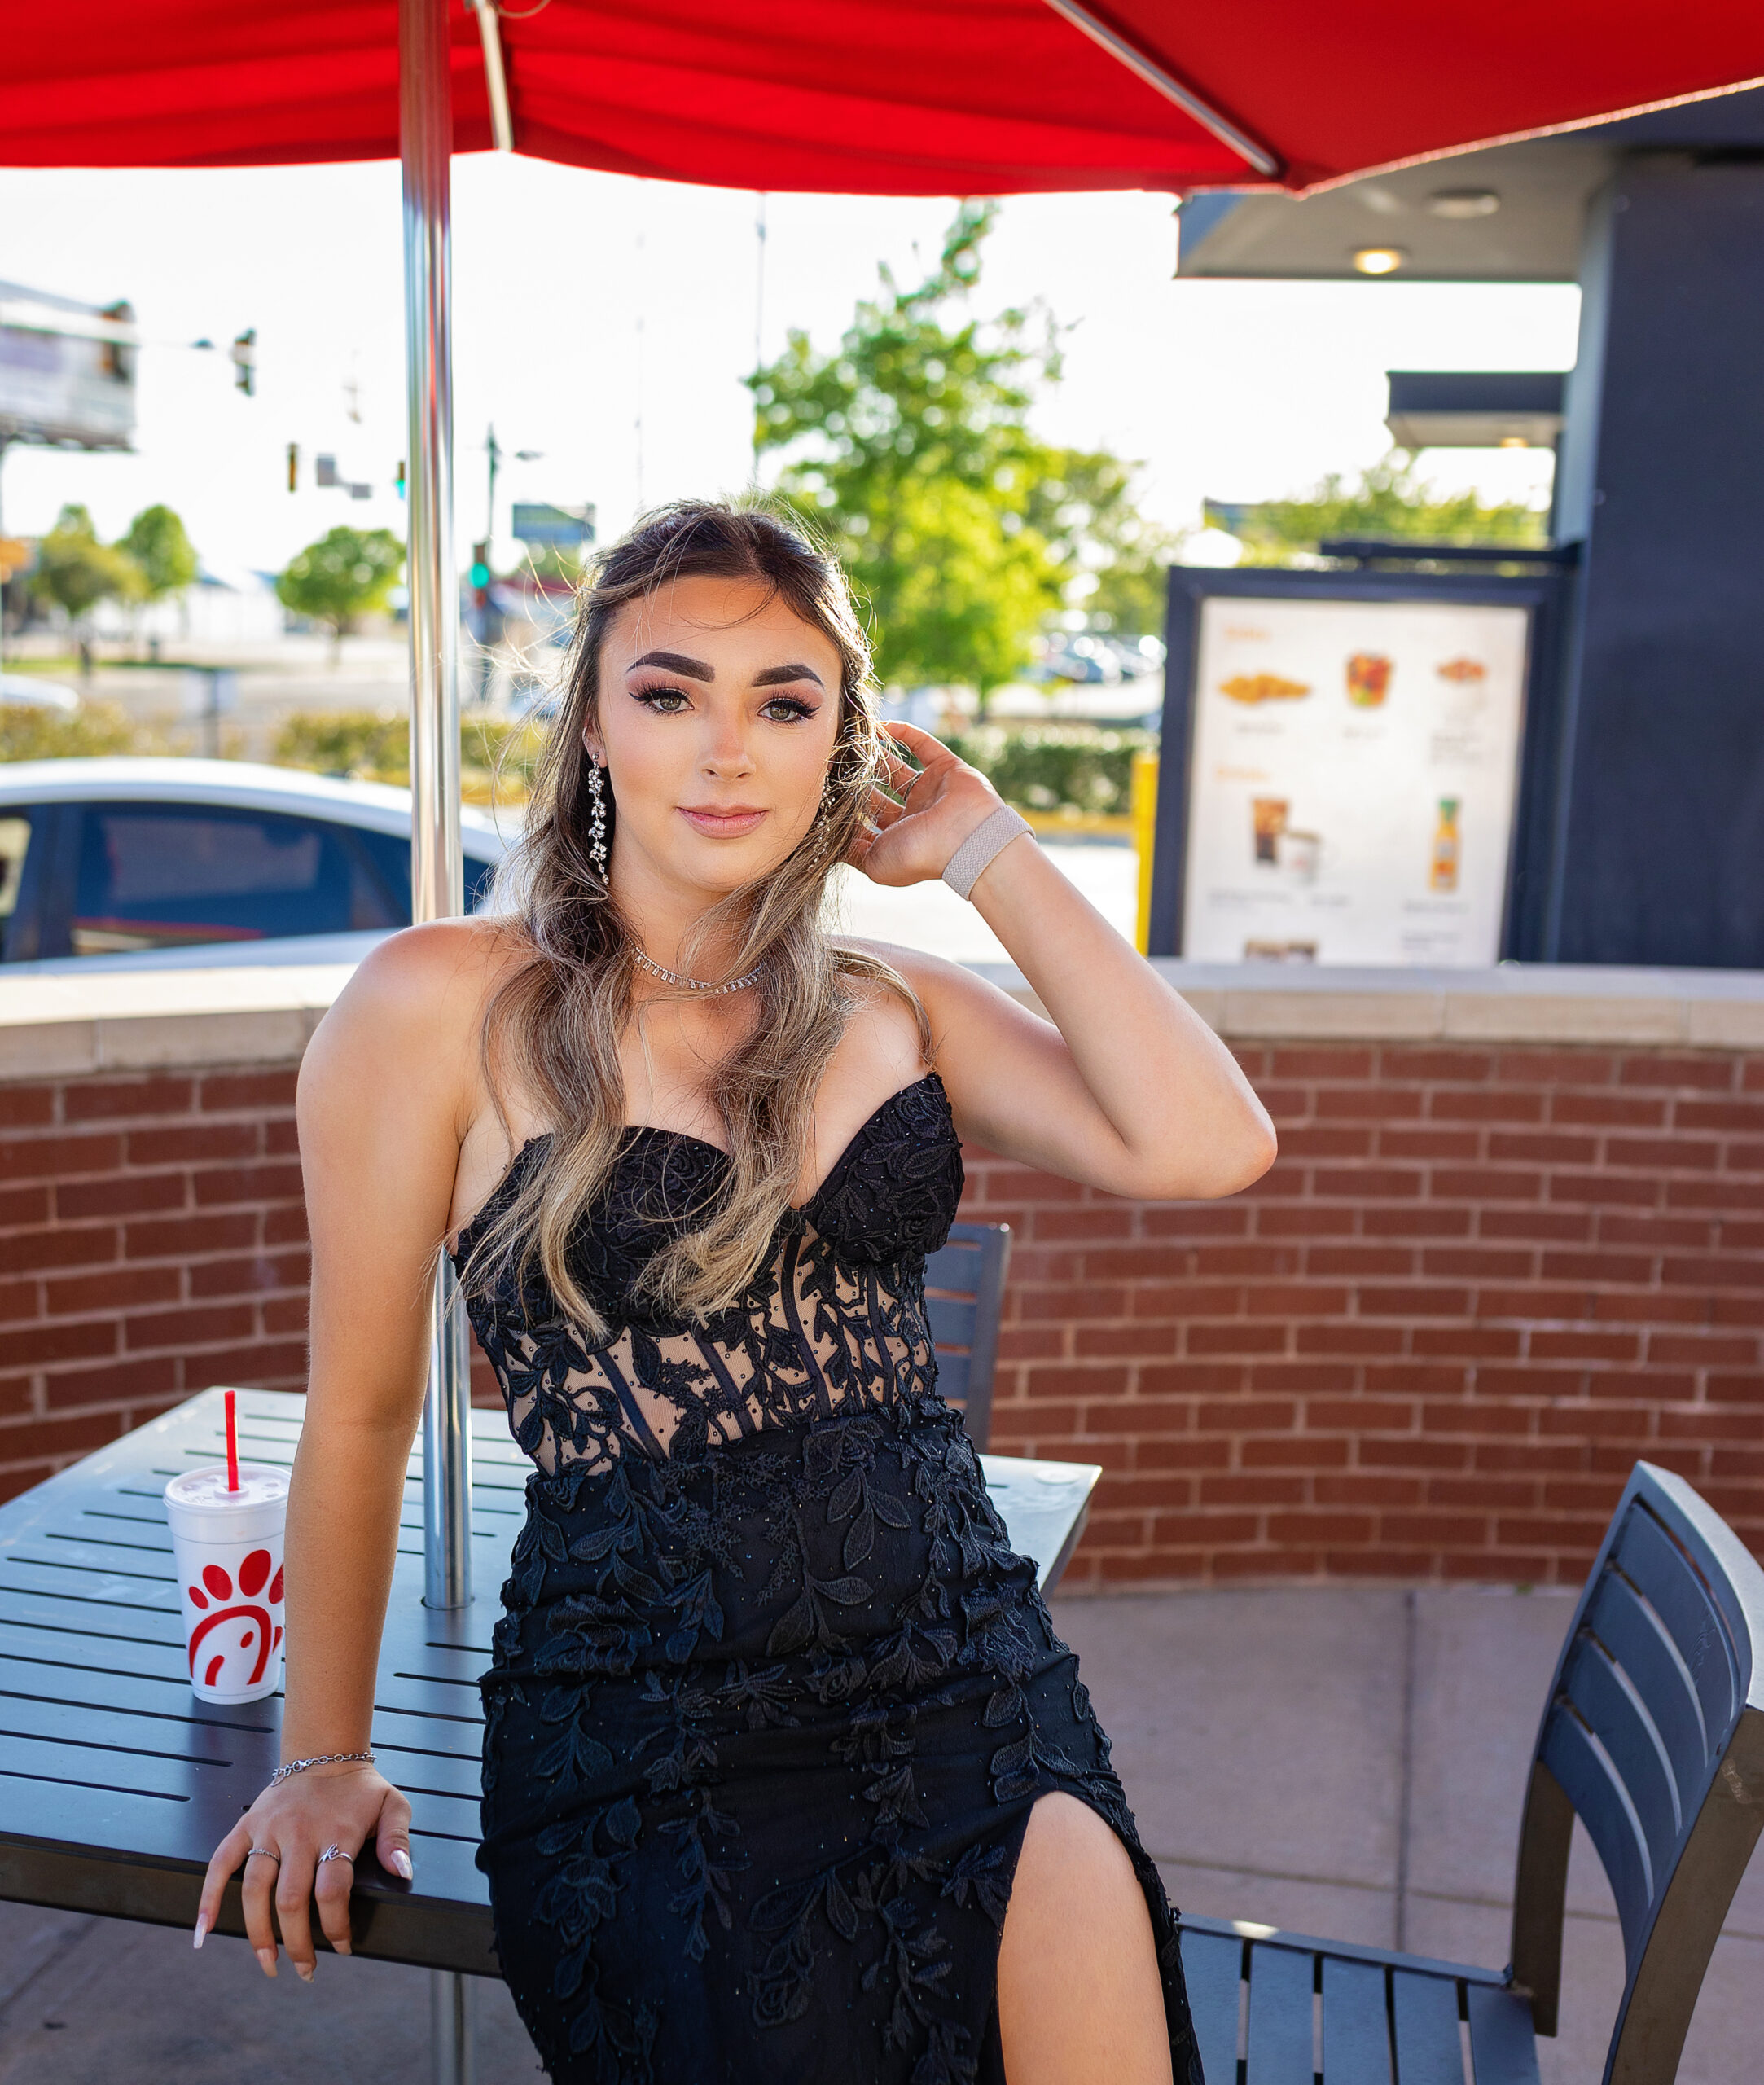 High school senior dressed up at Chick-fil-A to have dinner before prom